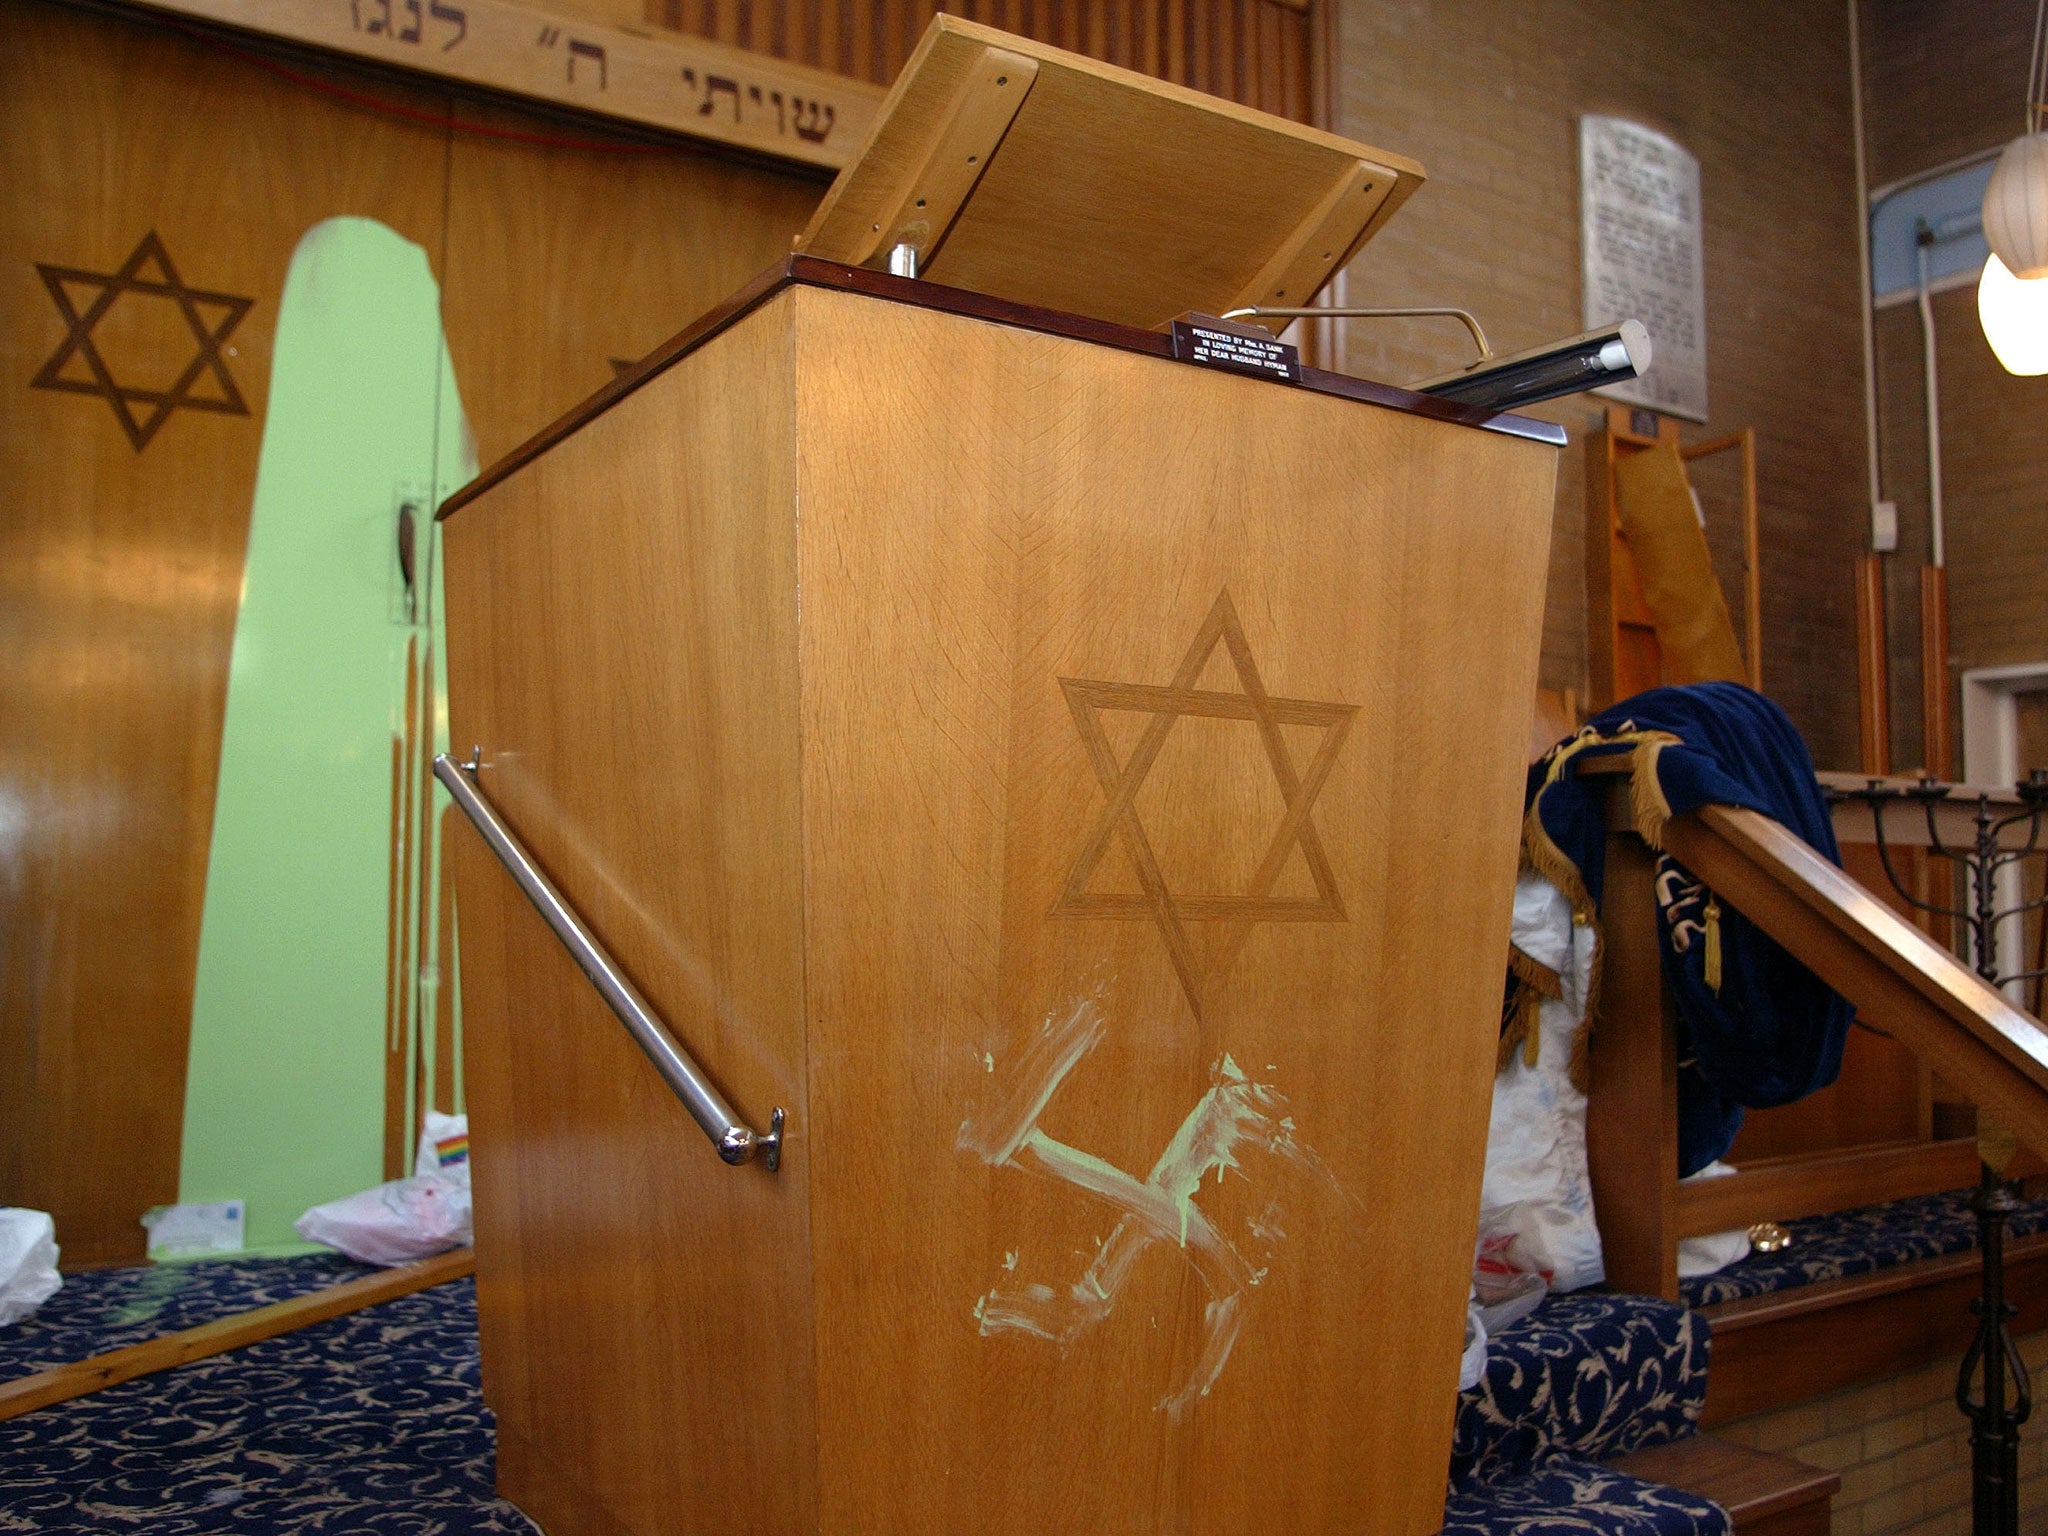 A swastika daubed beneath the Star of David on a preaching lectern at Finsbury Park Synagogue in 2002. The Home Secretary will stress the moves are aimed not just at Islamist extremists but also Neo-Nazis and anyone dedicated to overthrowing democracy